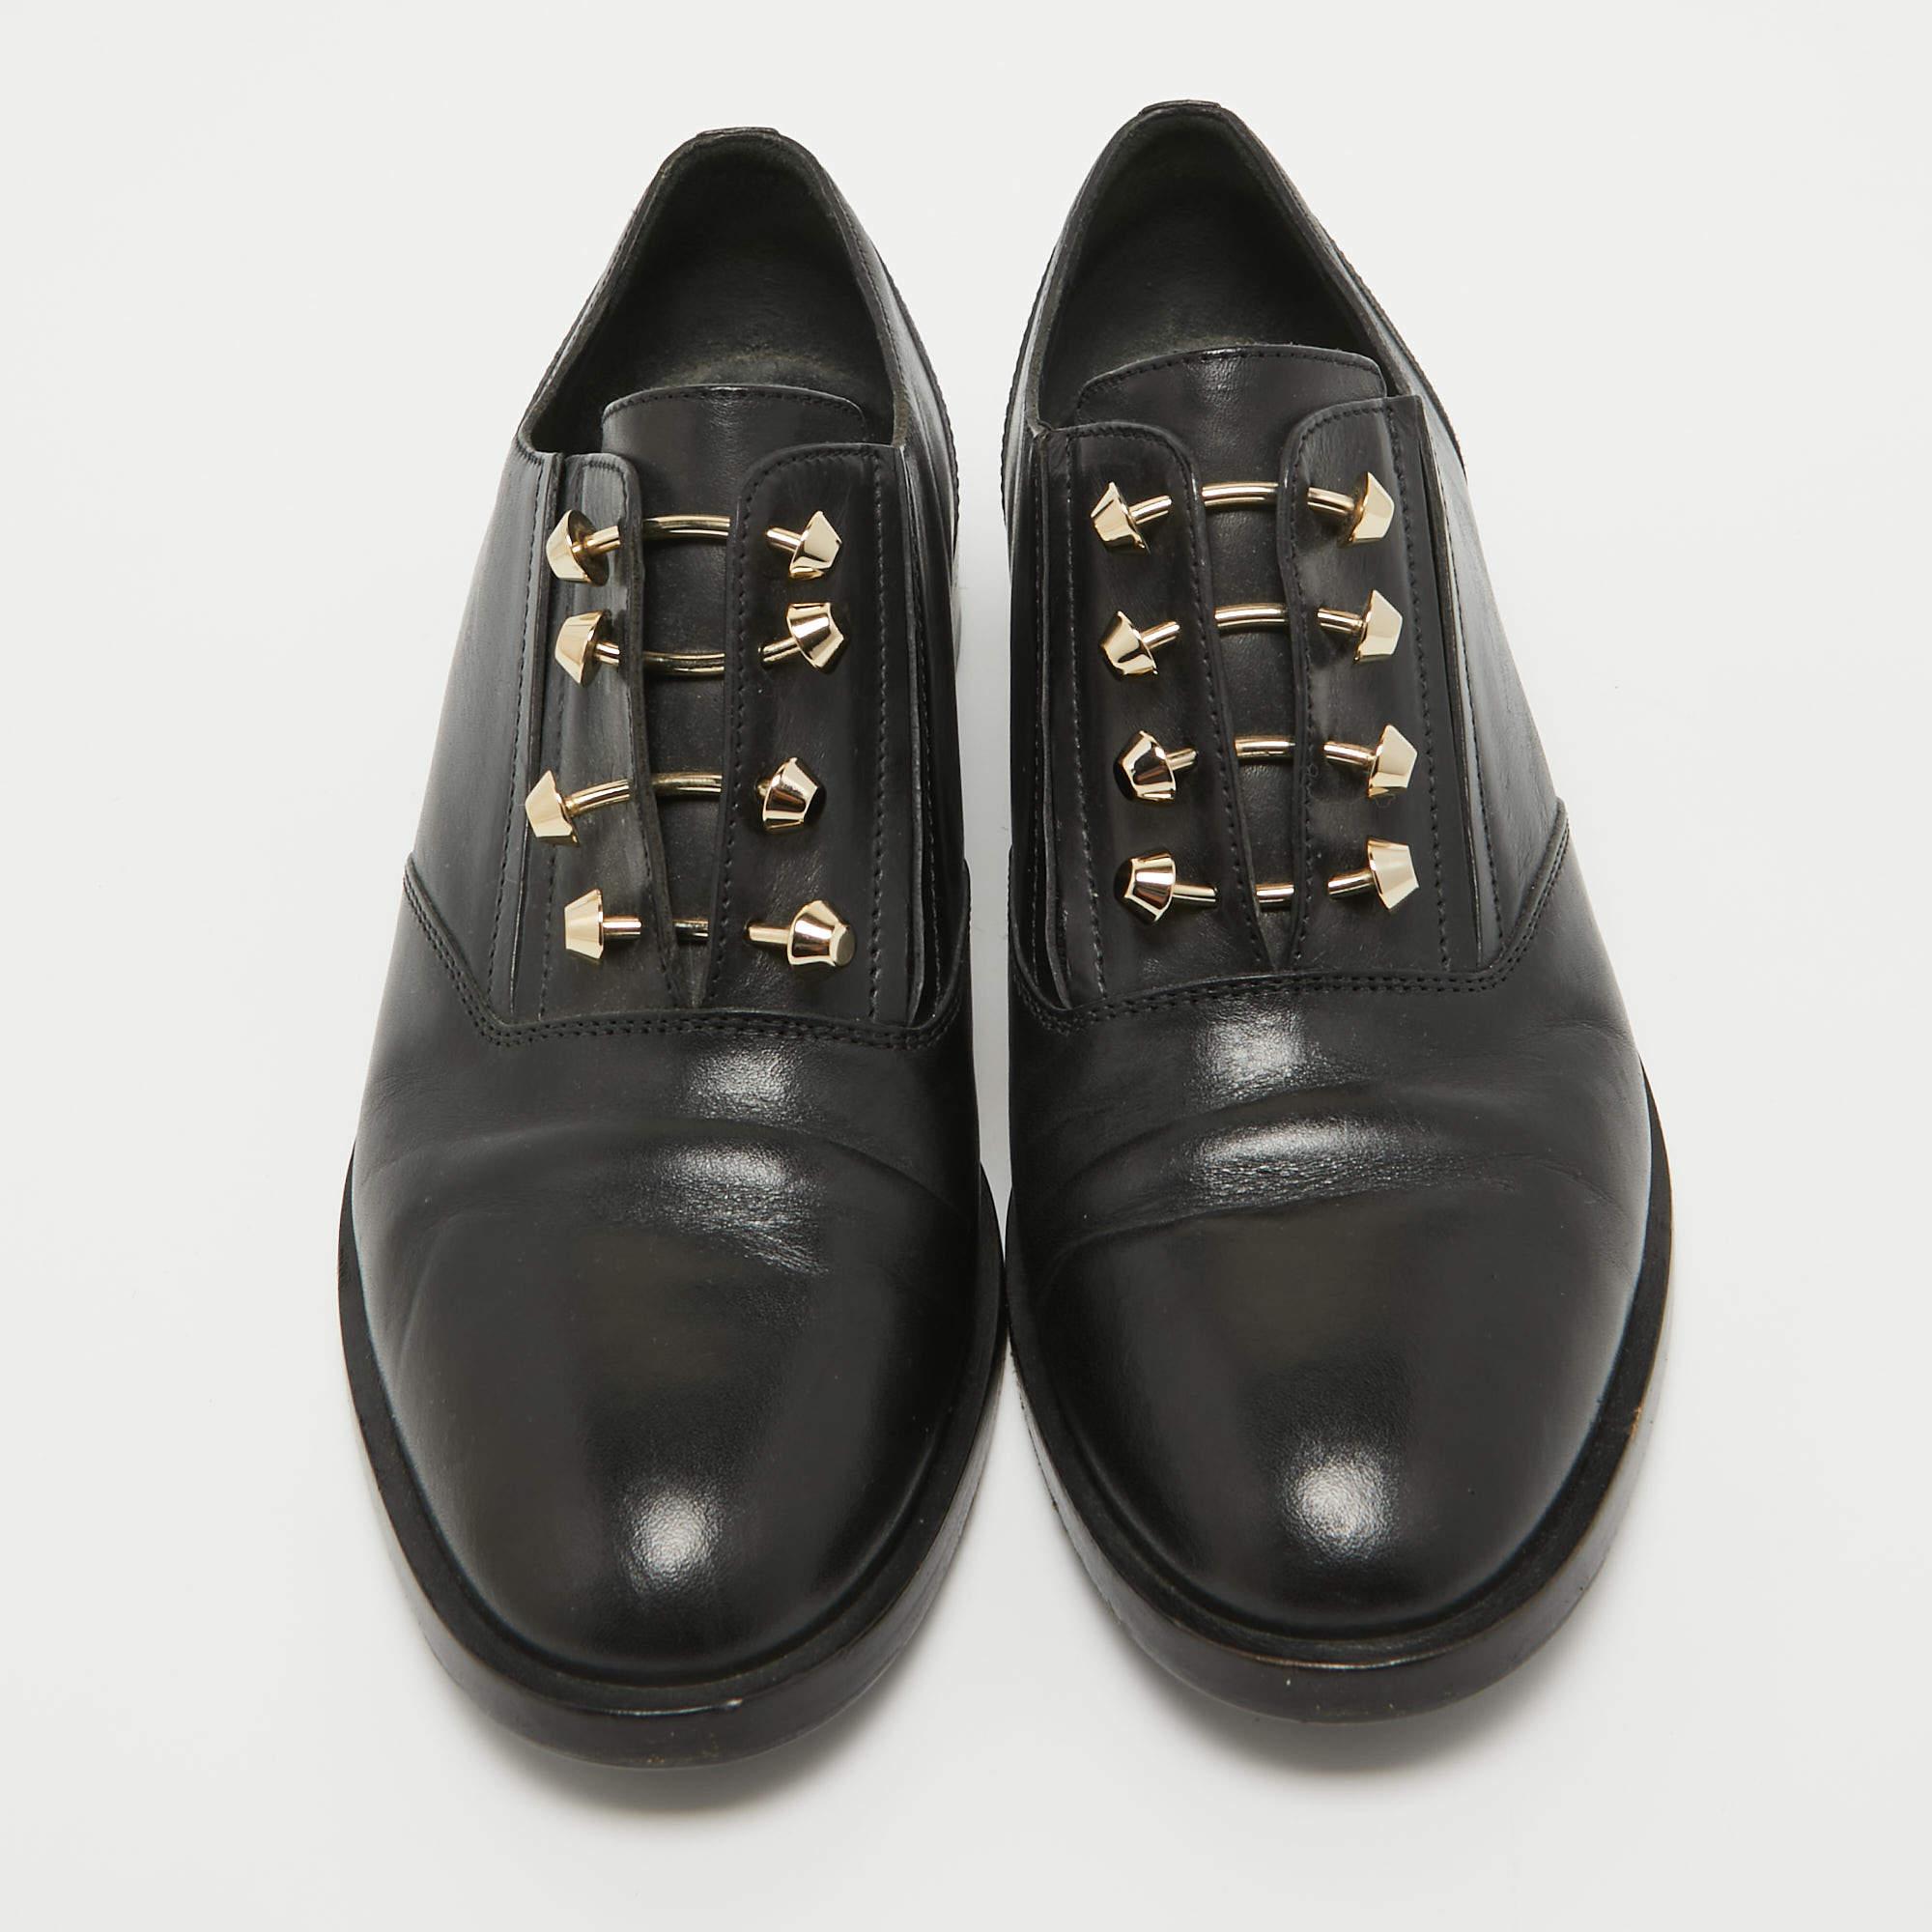 These oxfords are designed from the finest material featuring an elegant look, sturdy soles, and lace-ups on the vamps. Team these shoes with tailored pants and a blazer for a smart formal look.

Includes: Original Dustbag

